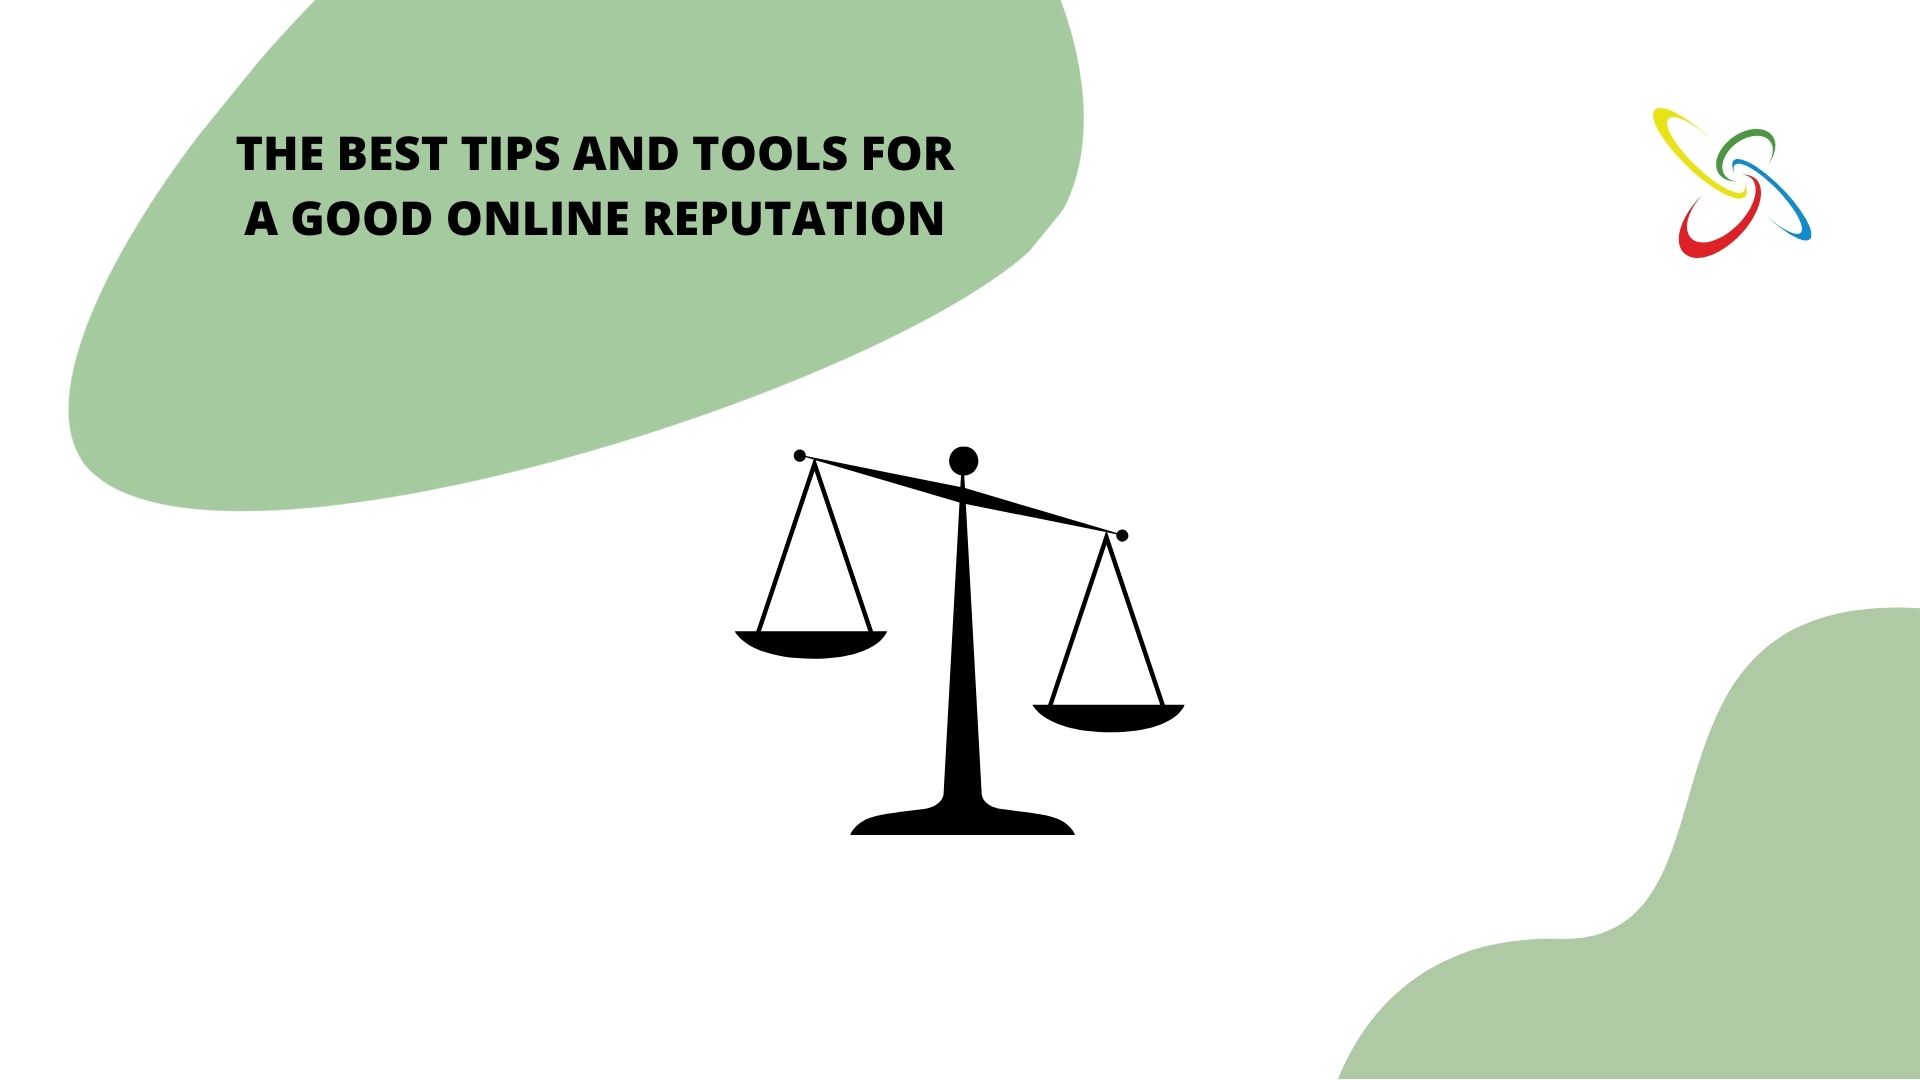 The best tips and tools for a good online reputation